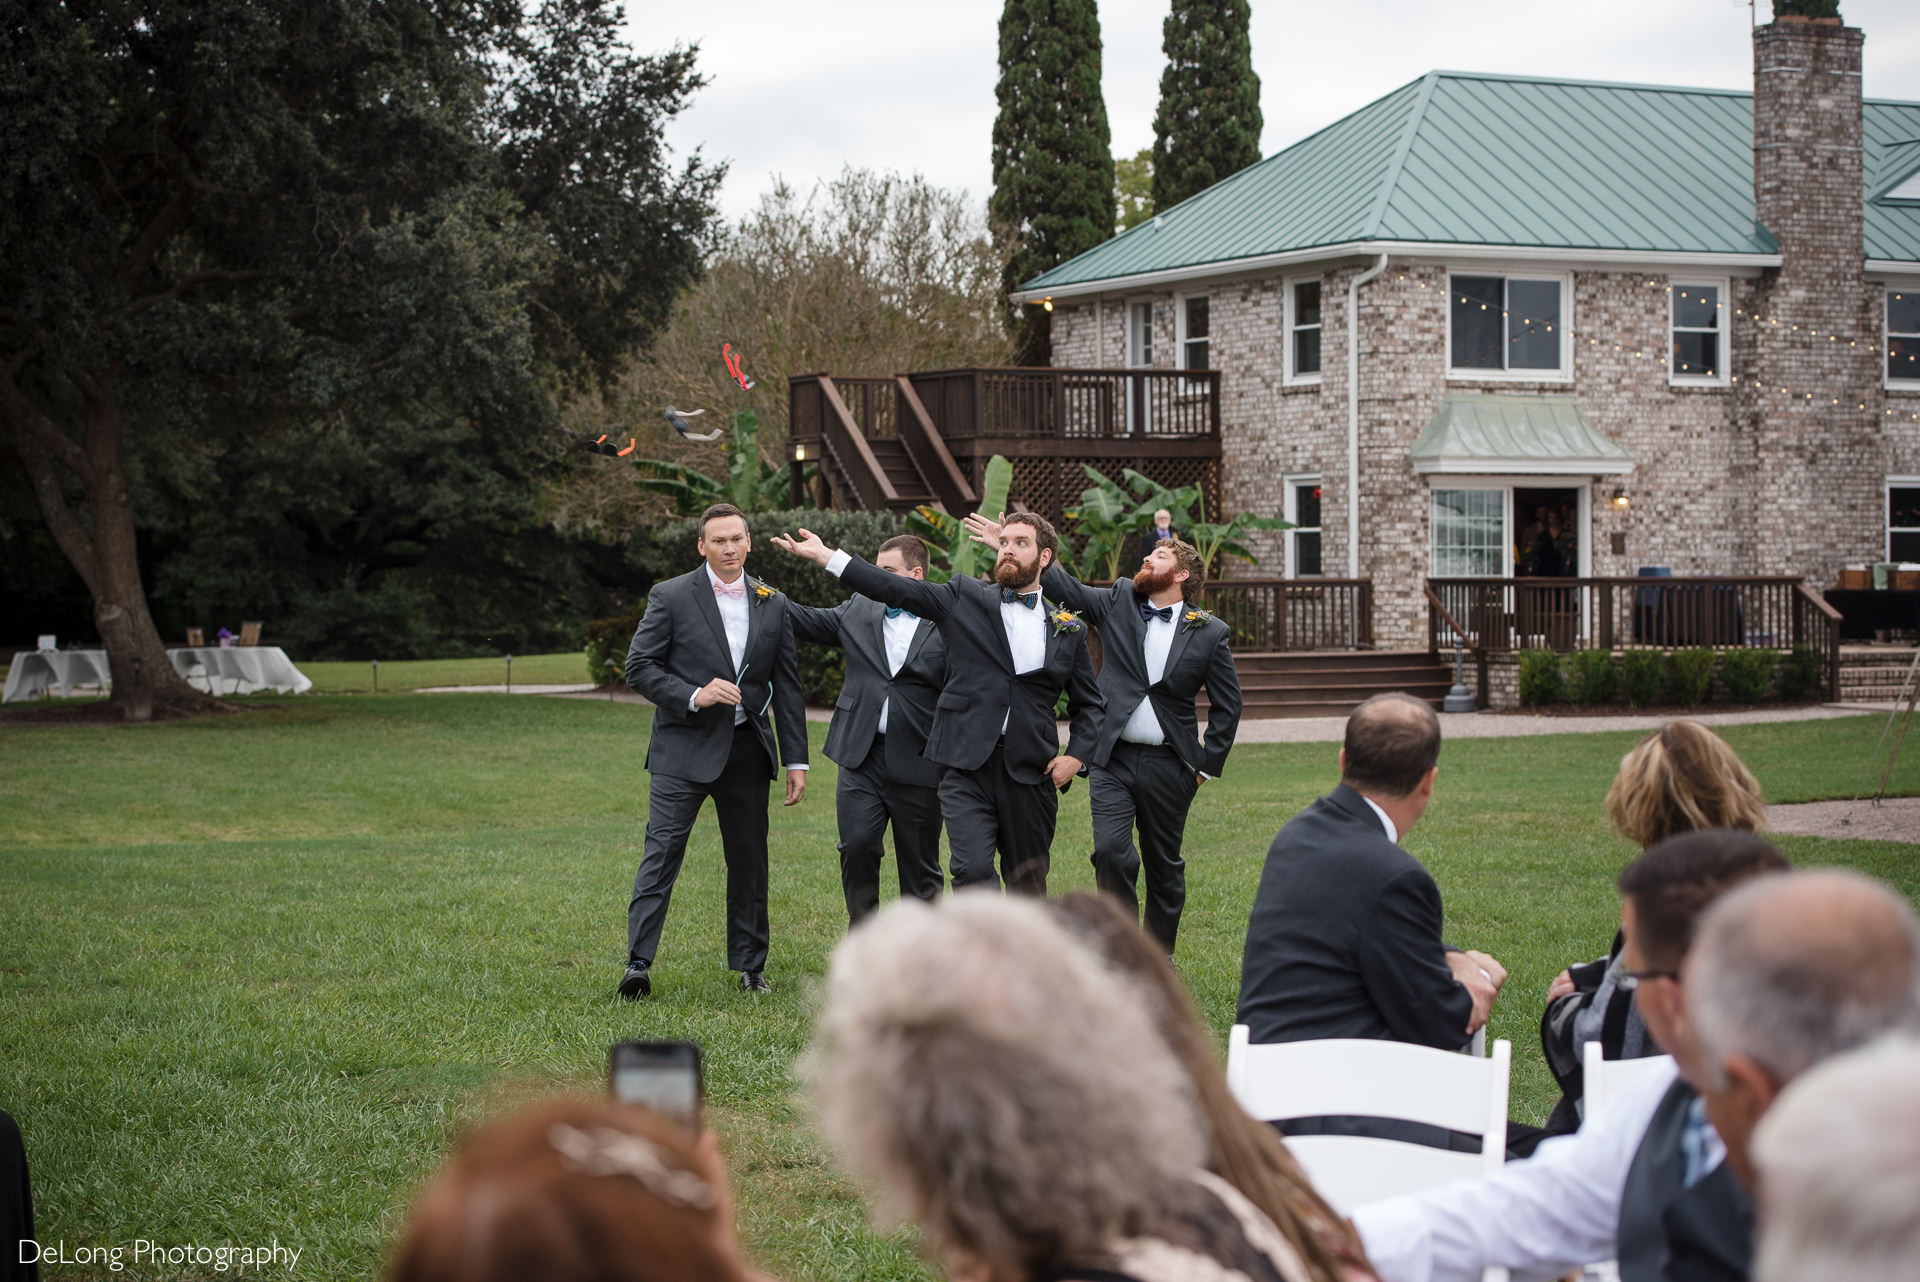 Groom and groomsmen doing a funny ceremony entrance by walking out throwing their sunglasses at the Island House in Charleston, SC by Charlotte Wedding Photographers DeLong Photography